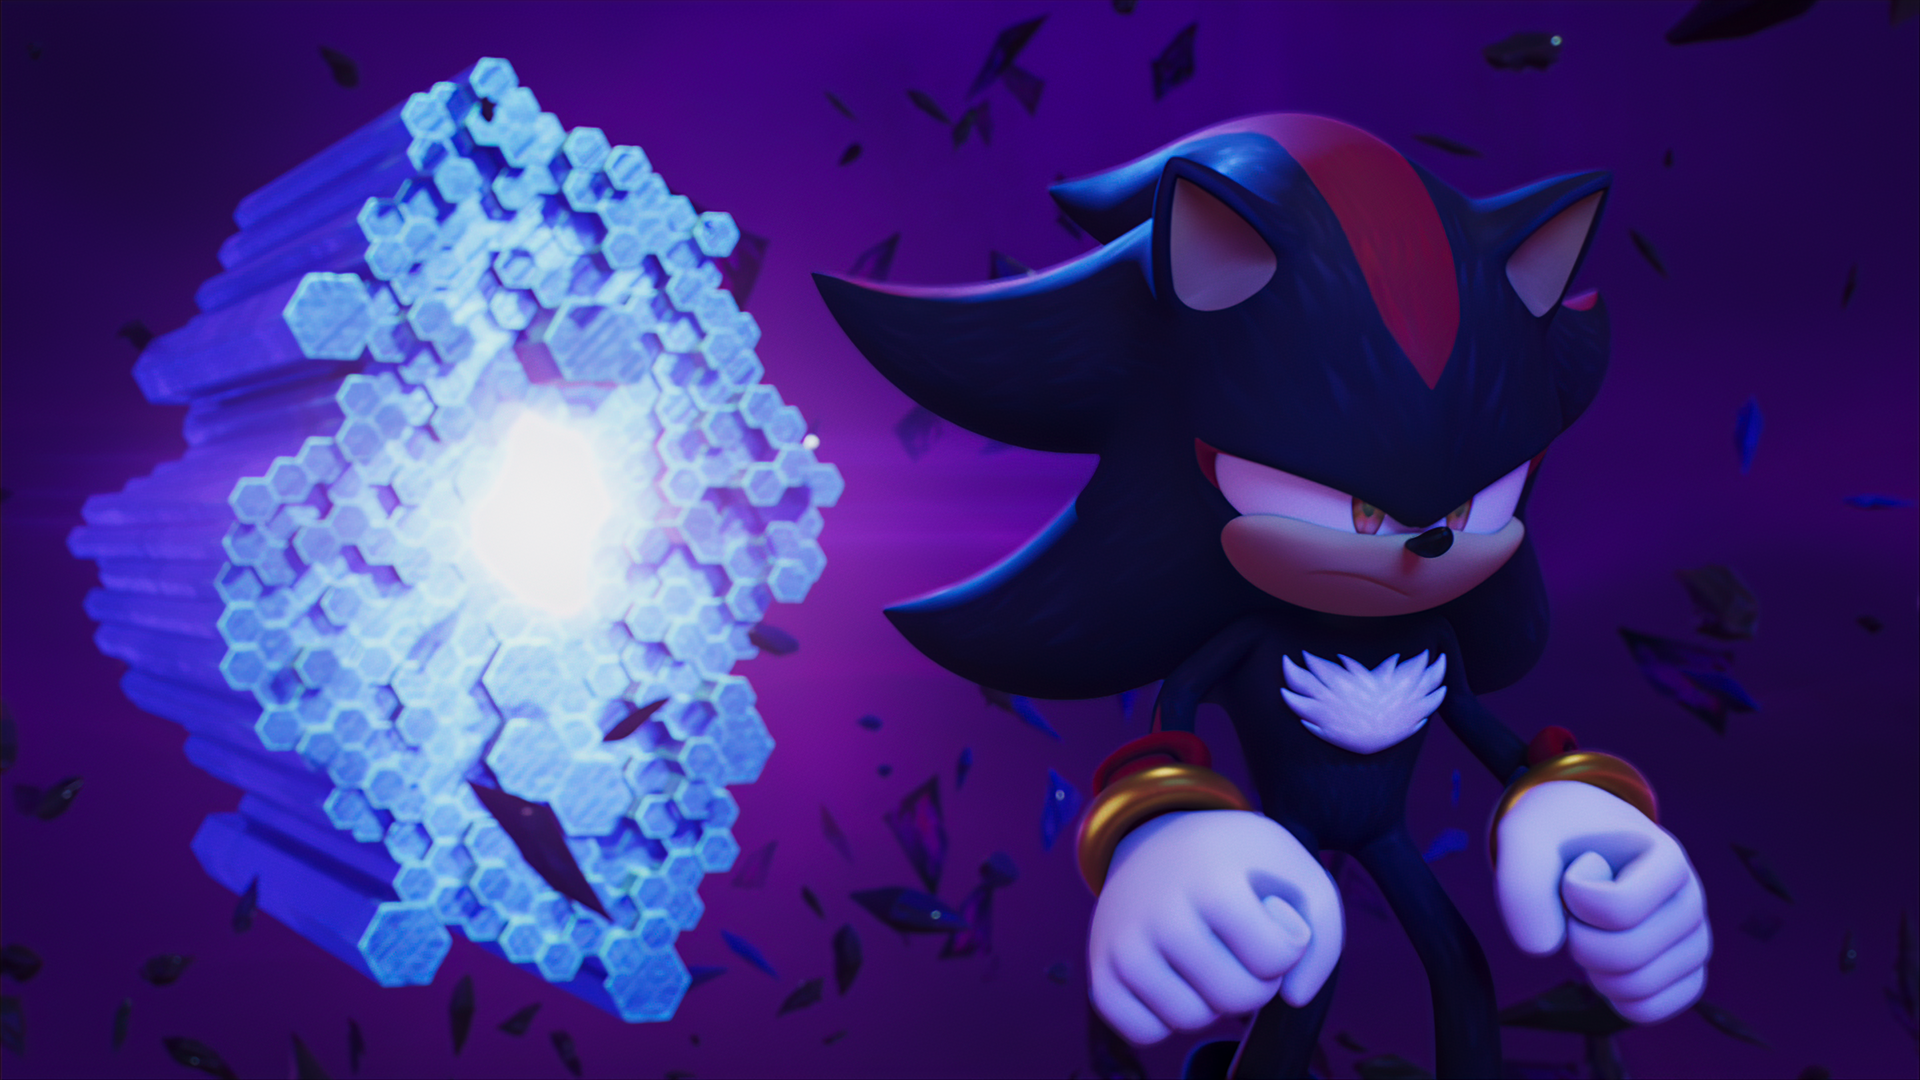 Sonic Prime - Shadow #129 by SonicBoomGirl23 on DeviantArt